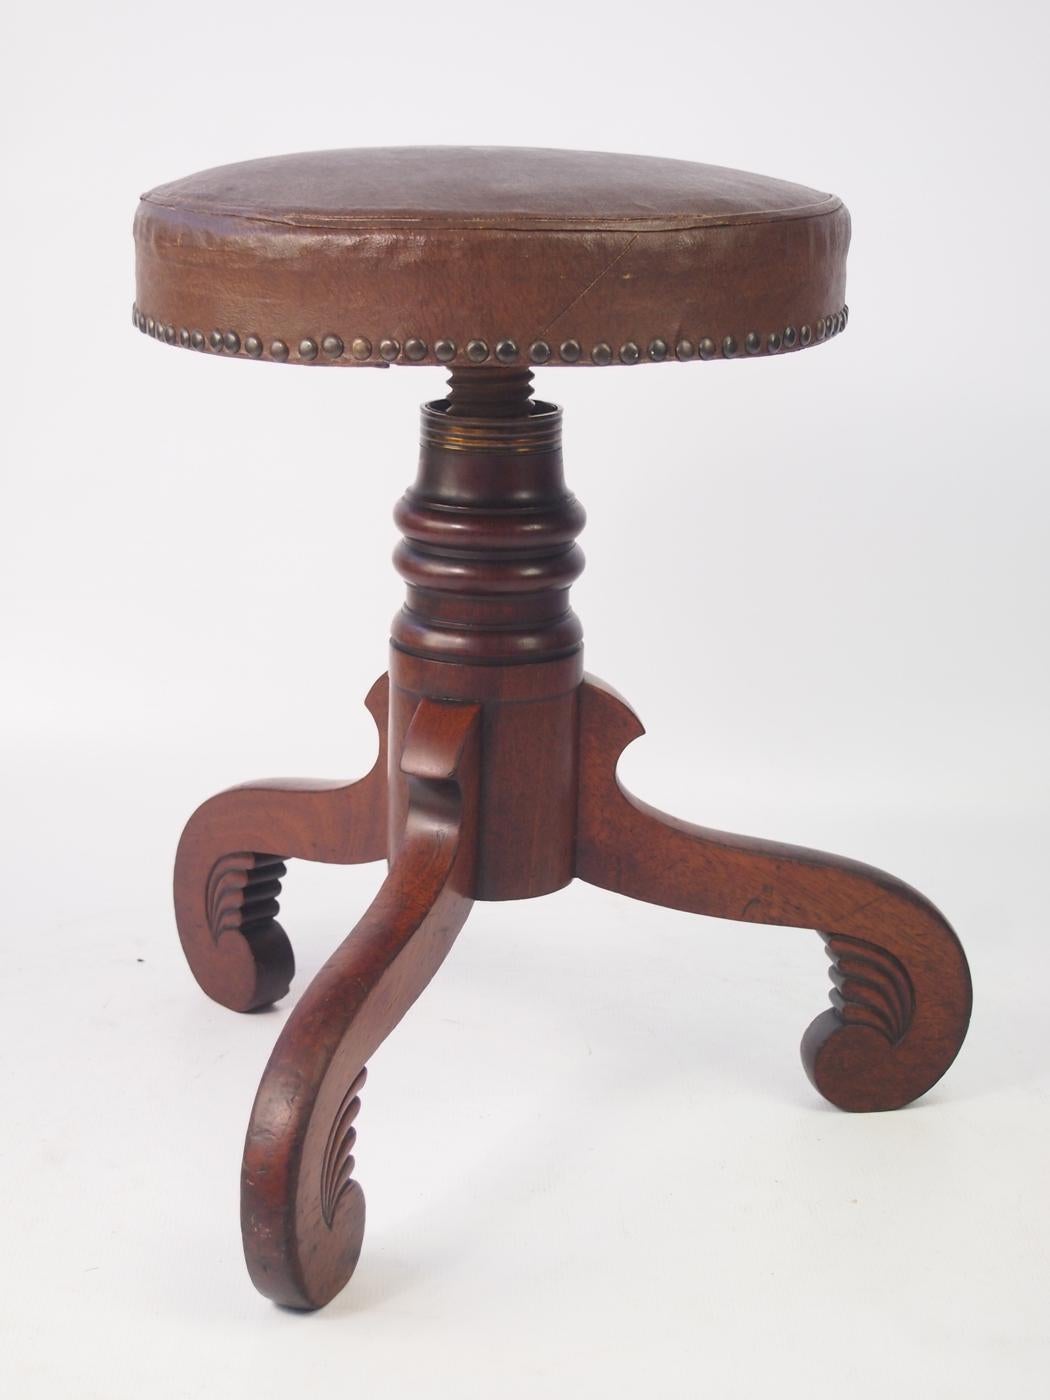 A handsome and rare antique early Victorian/ late Regency rise and fall piano stool in very good condition. A really stylish stool standing on an elegantly scrolled mahogany tripod legs with turned stem and carving to the feet. All original with